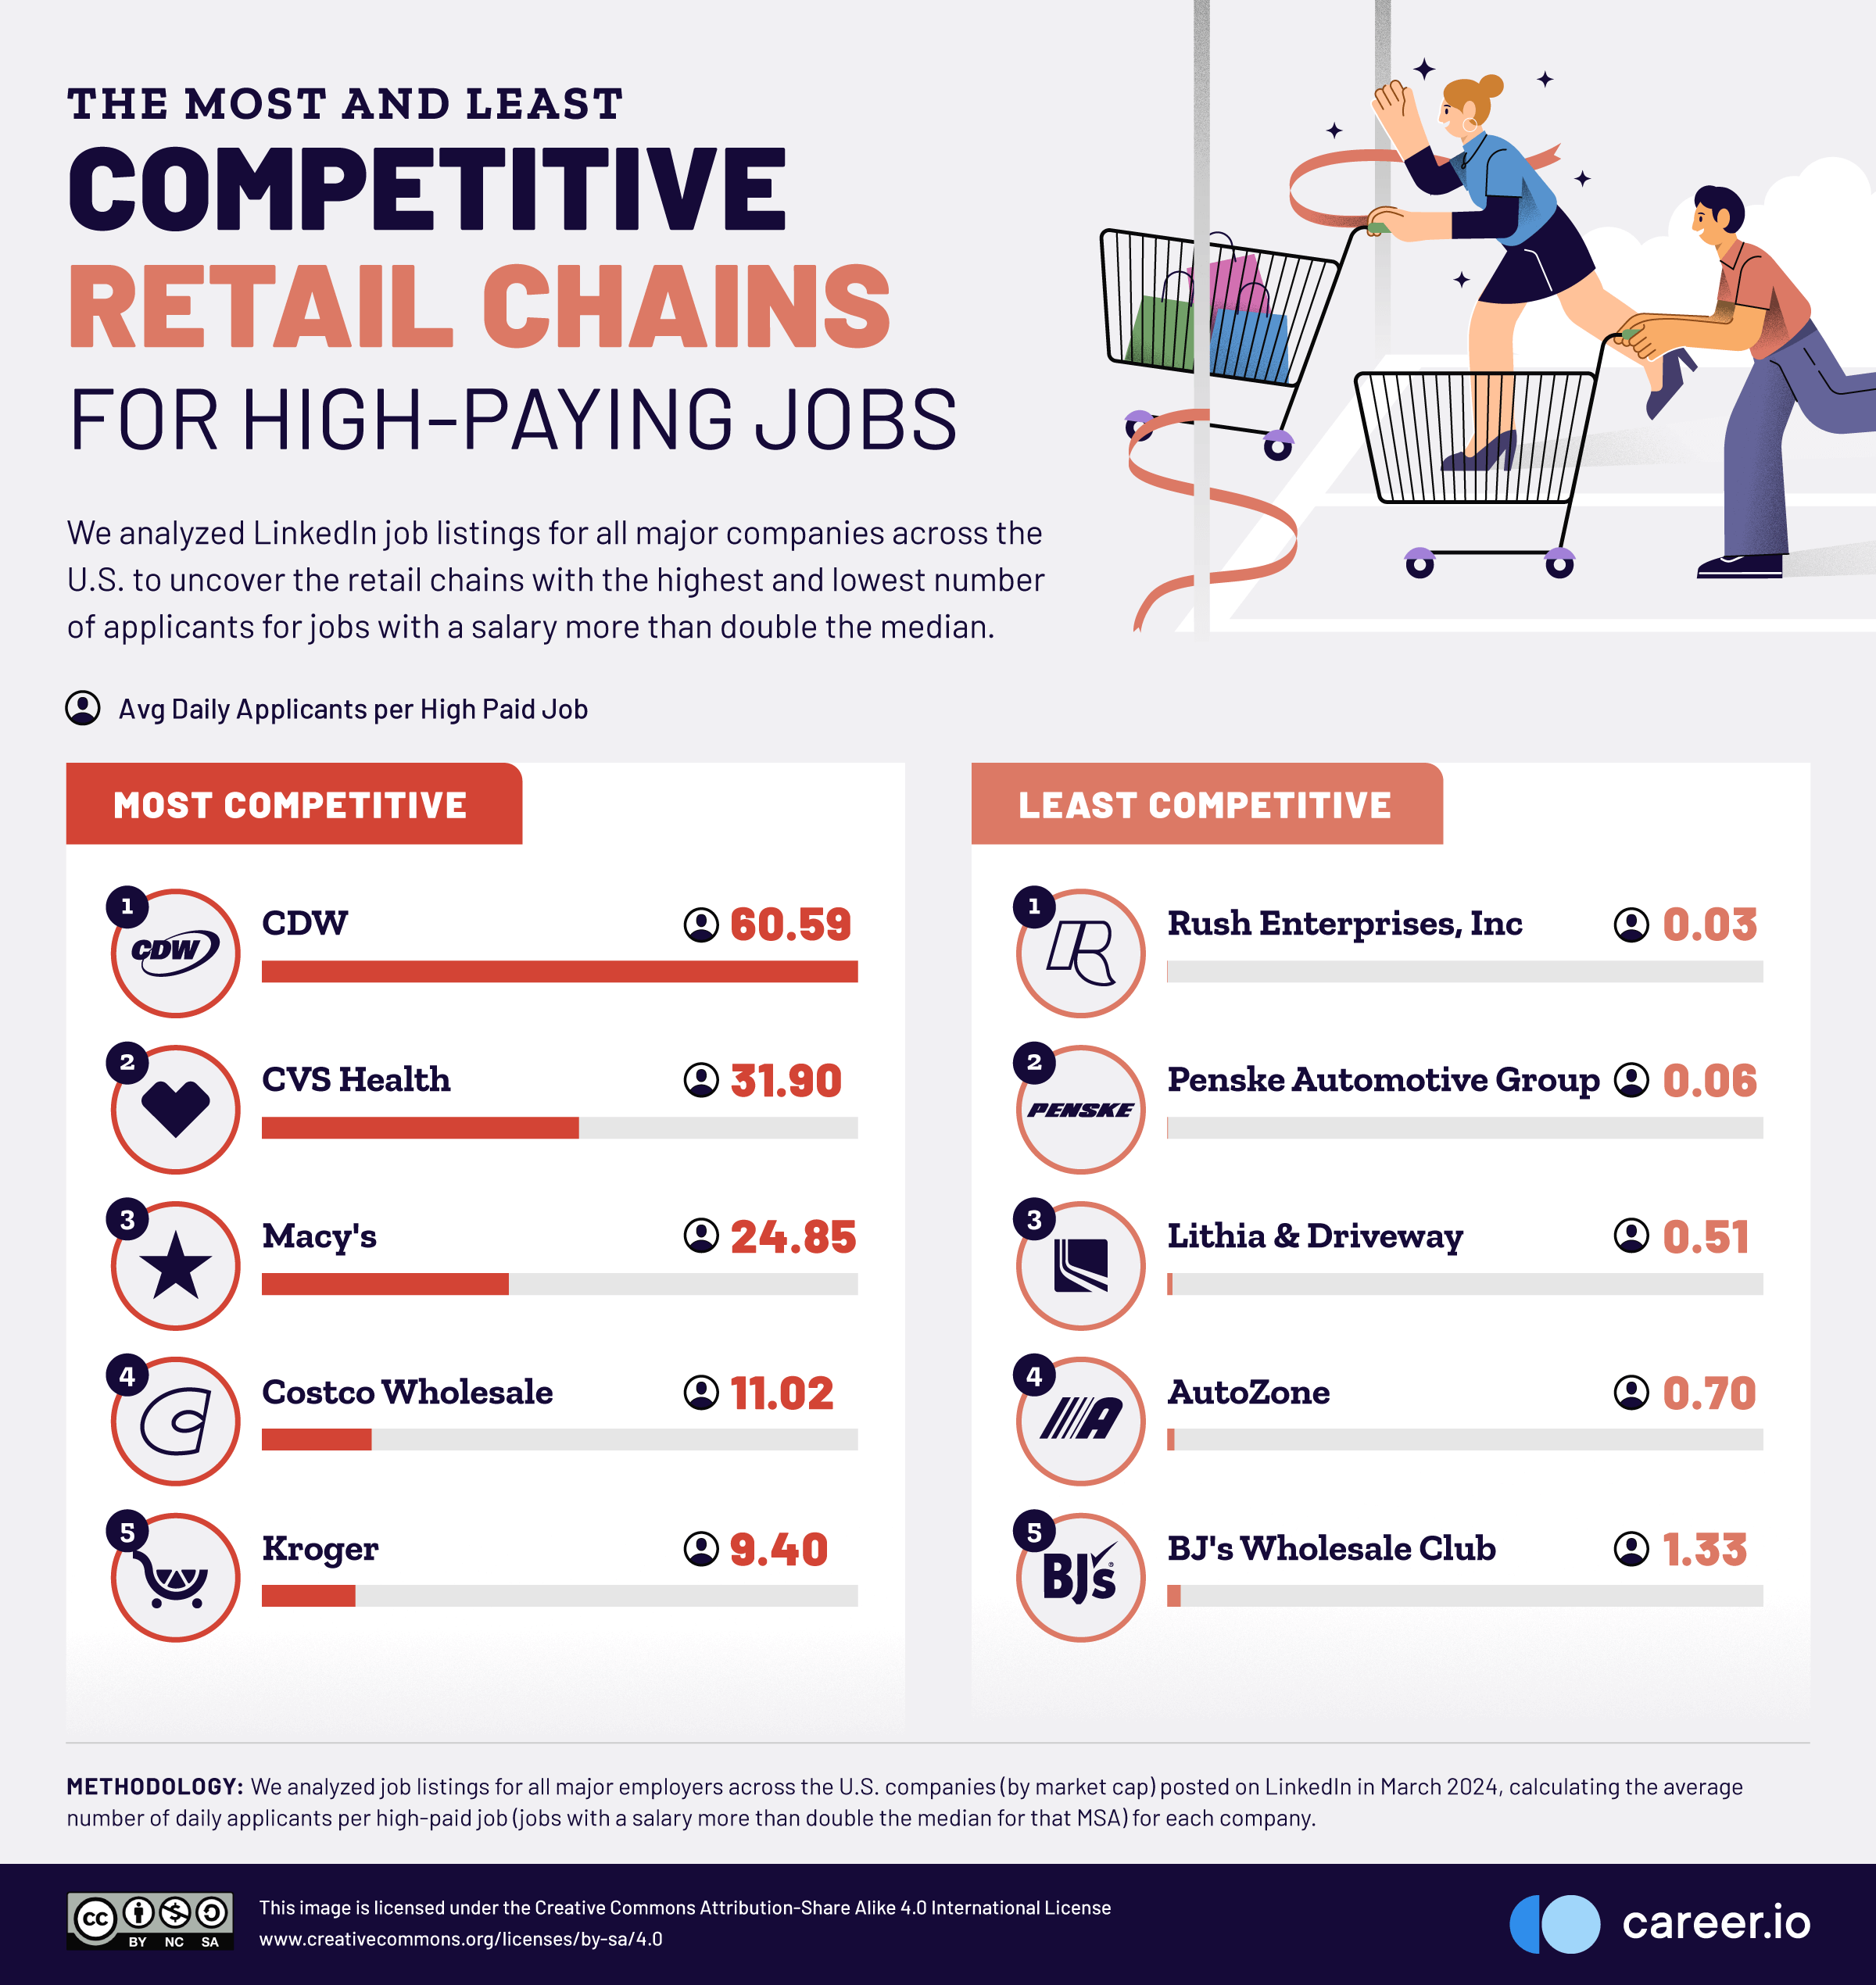 04 The-Most-and-Least-Competitive-Retail-Chains-For-High-Paying-Jobs